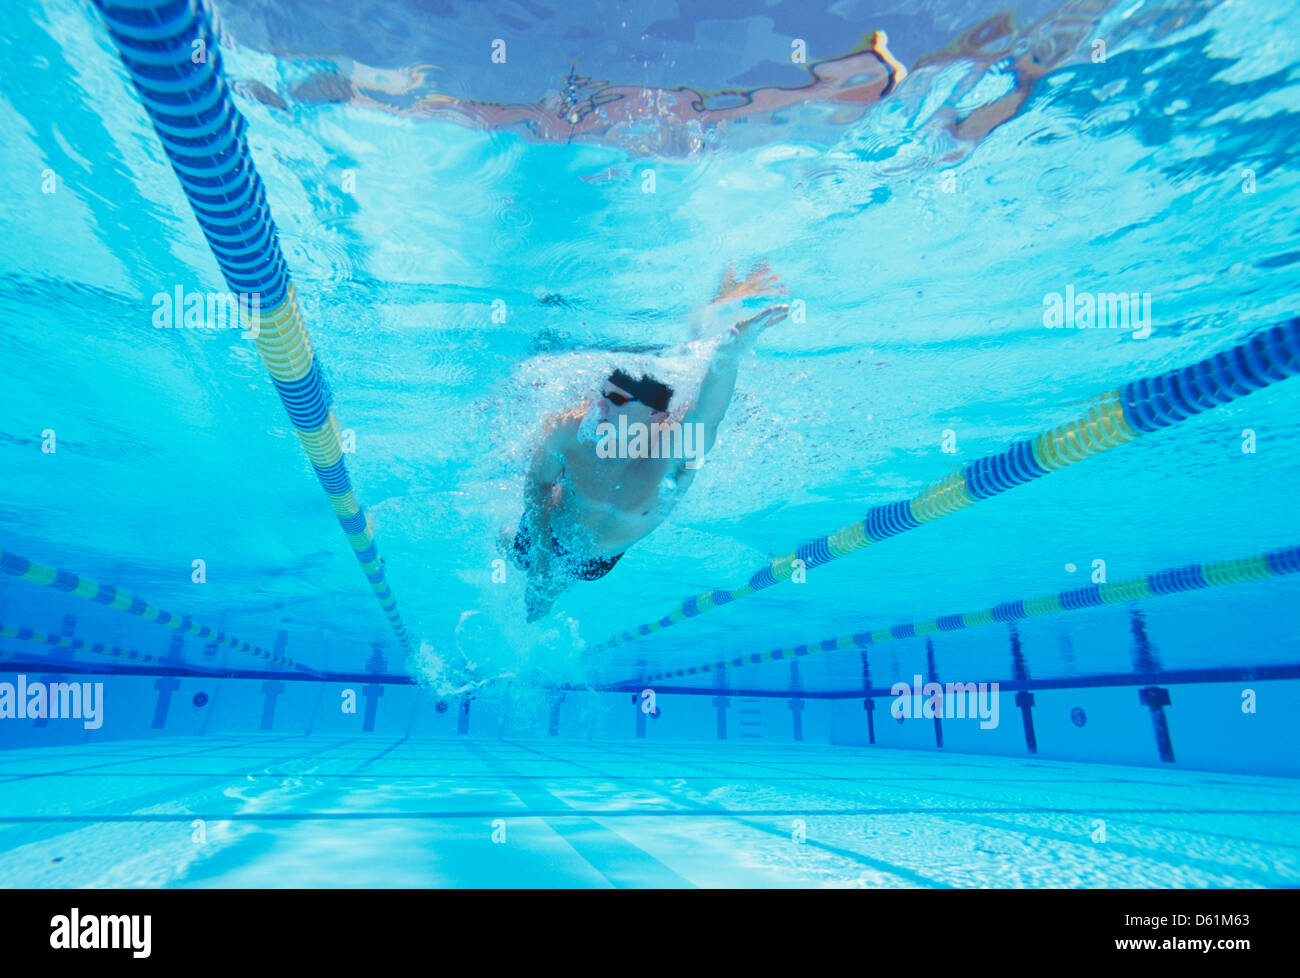 Underwater shot of young male thlete swimming in pool Stock Photo